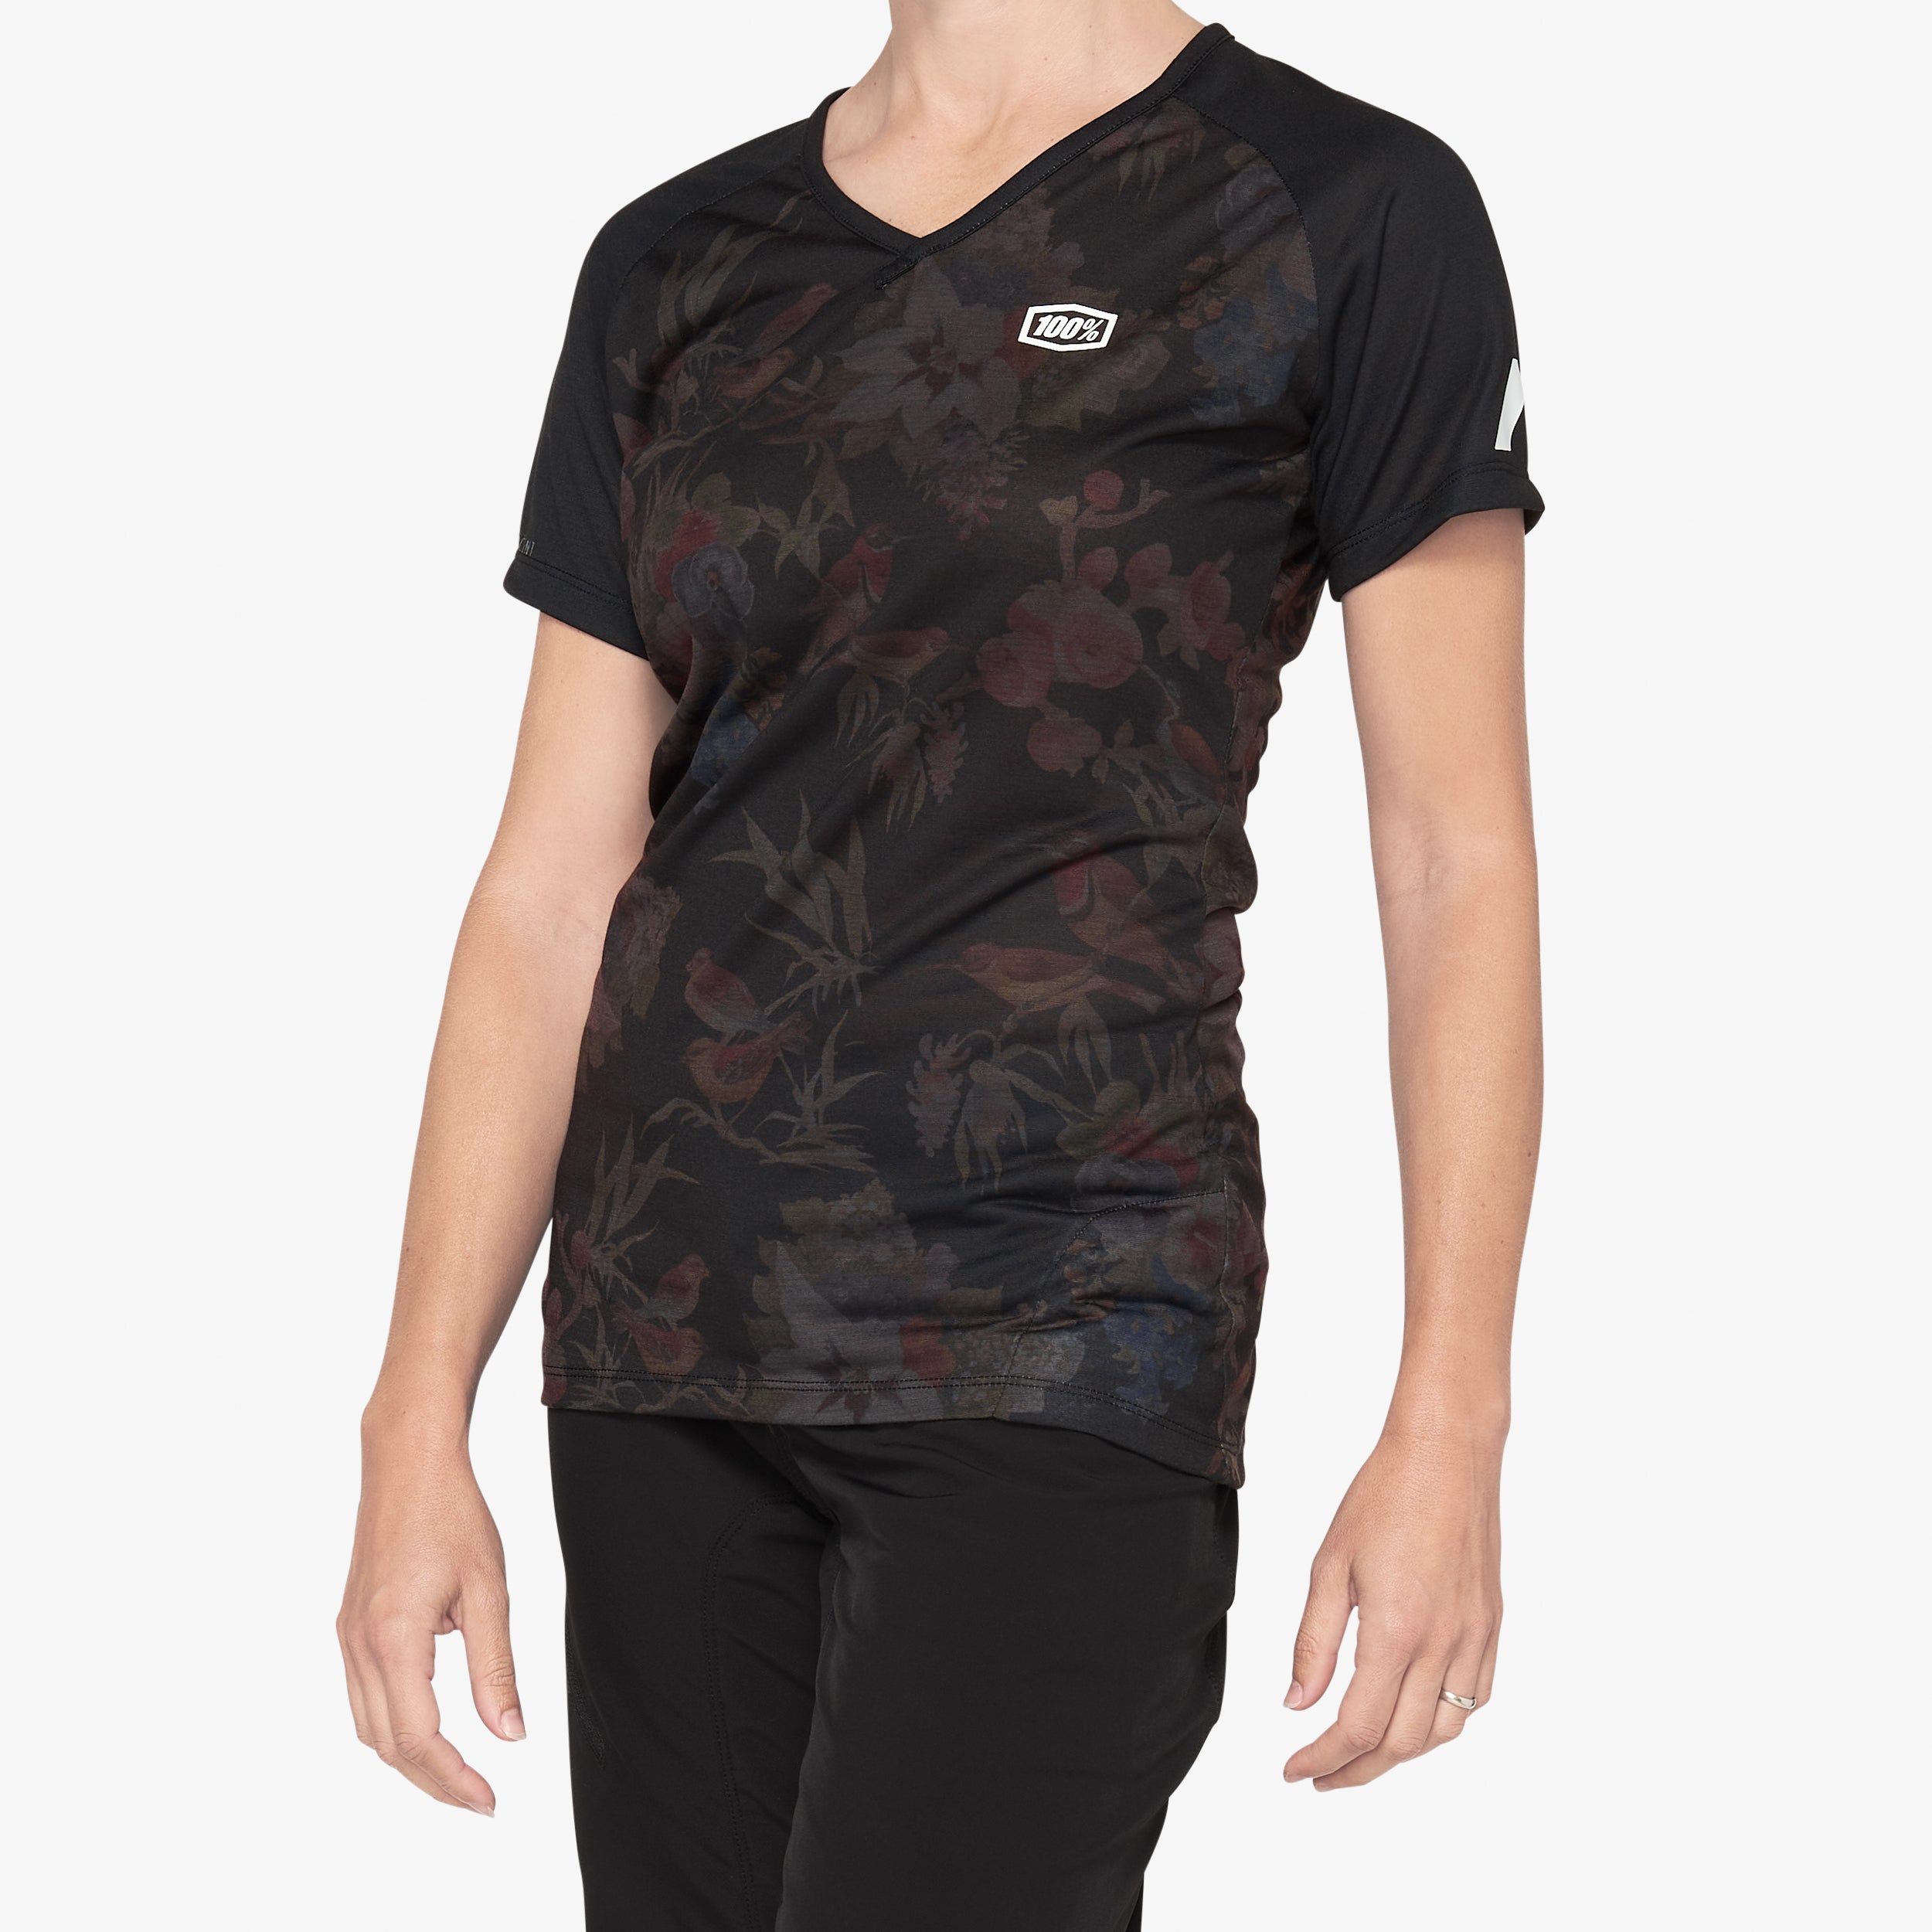 AIRMATIC Women's Jersey Black Floral